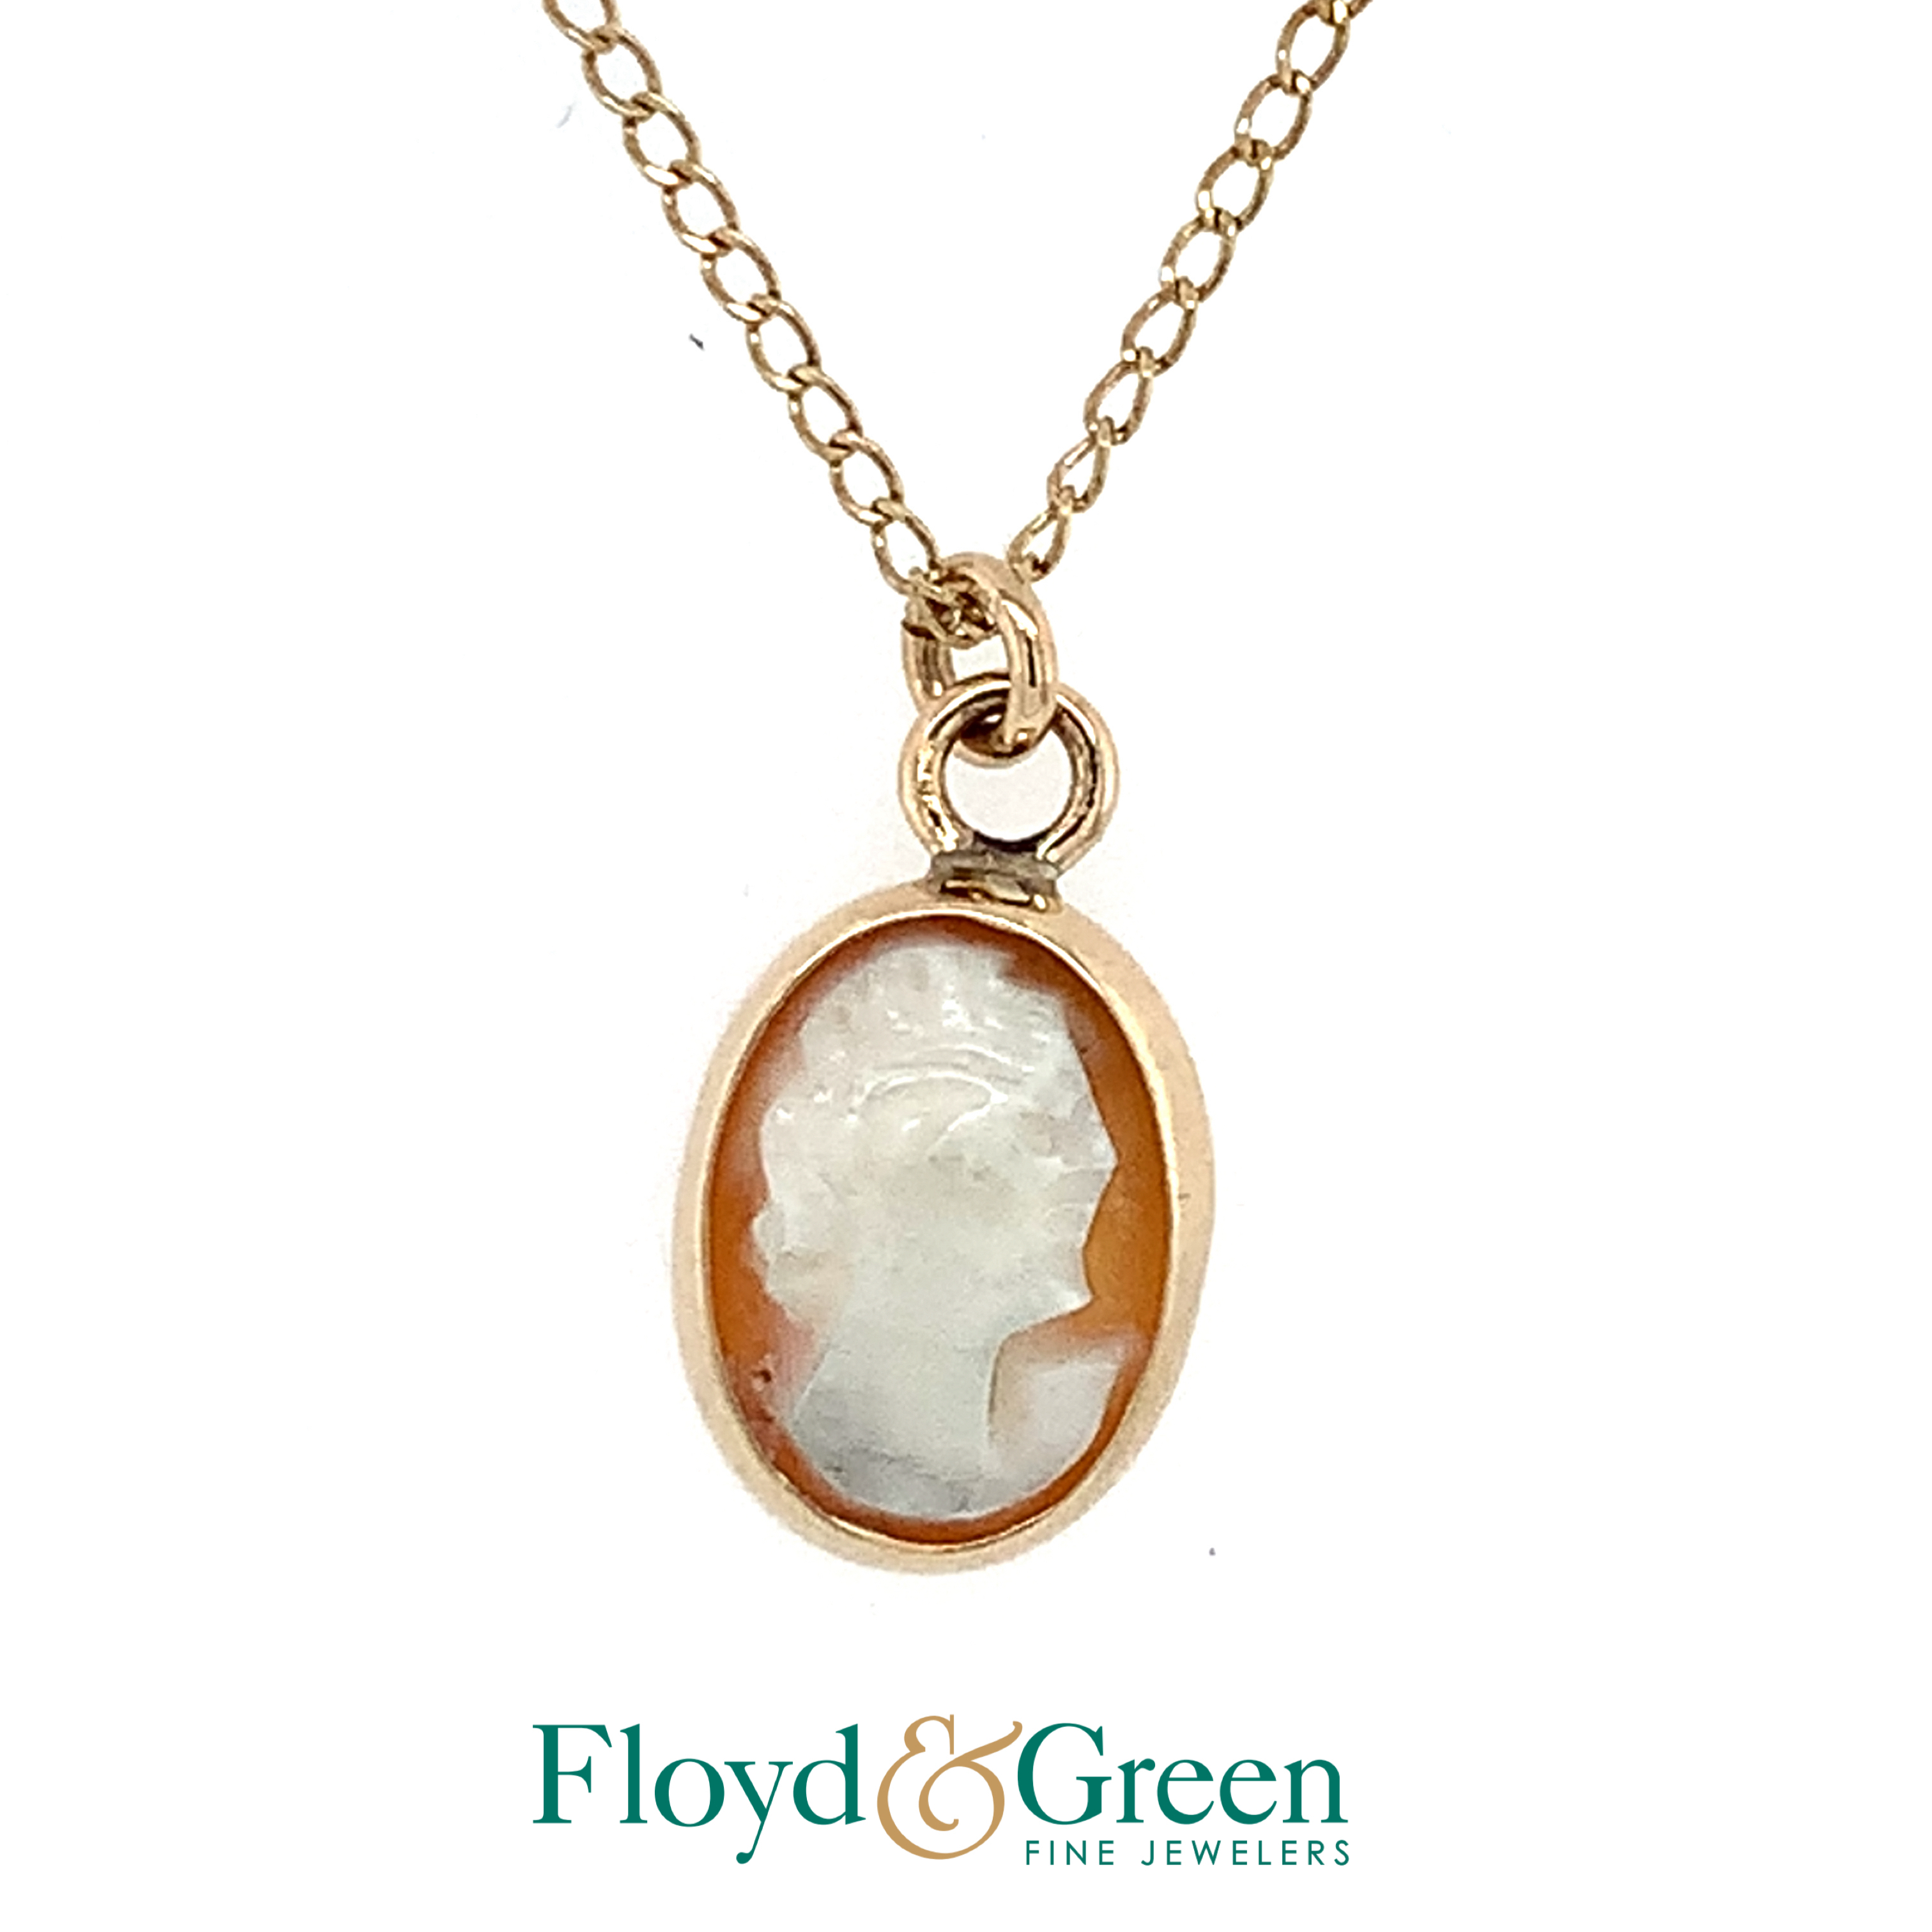 14KY Oval Cameo Pendant with a 14KY Chain, 15 inch, 0.9g